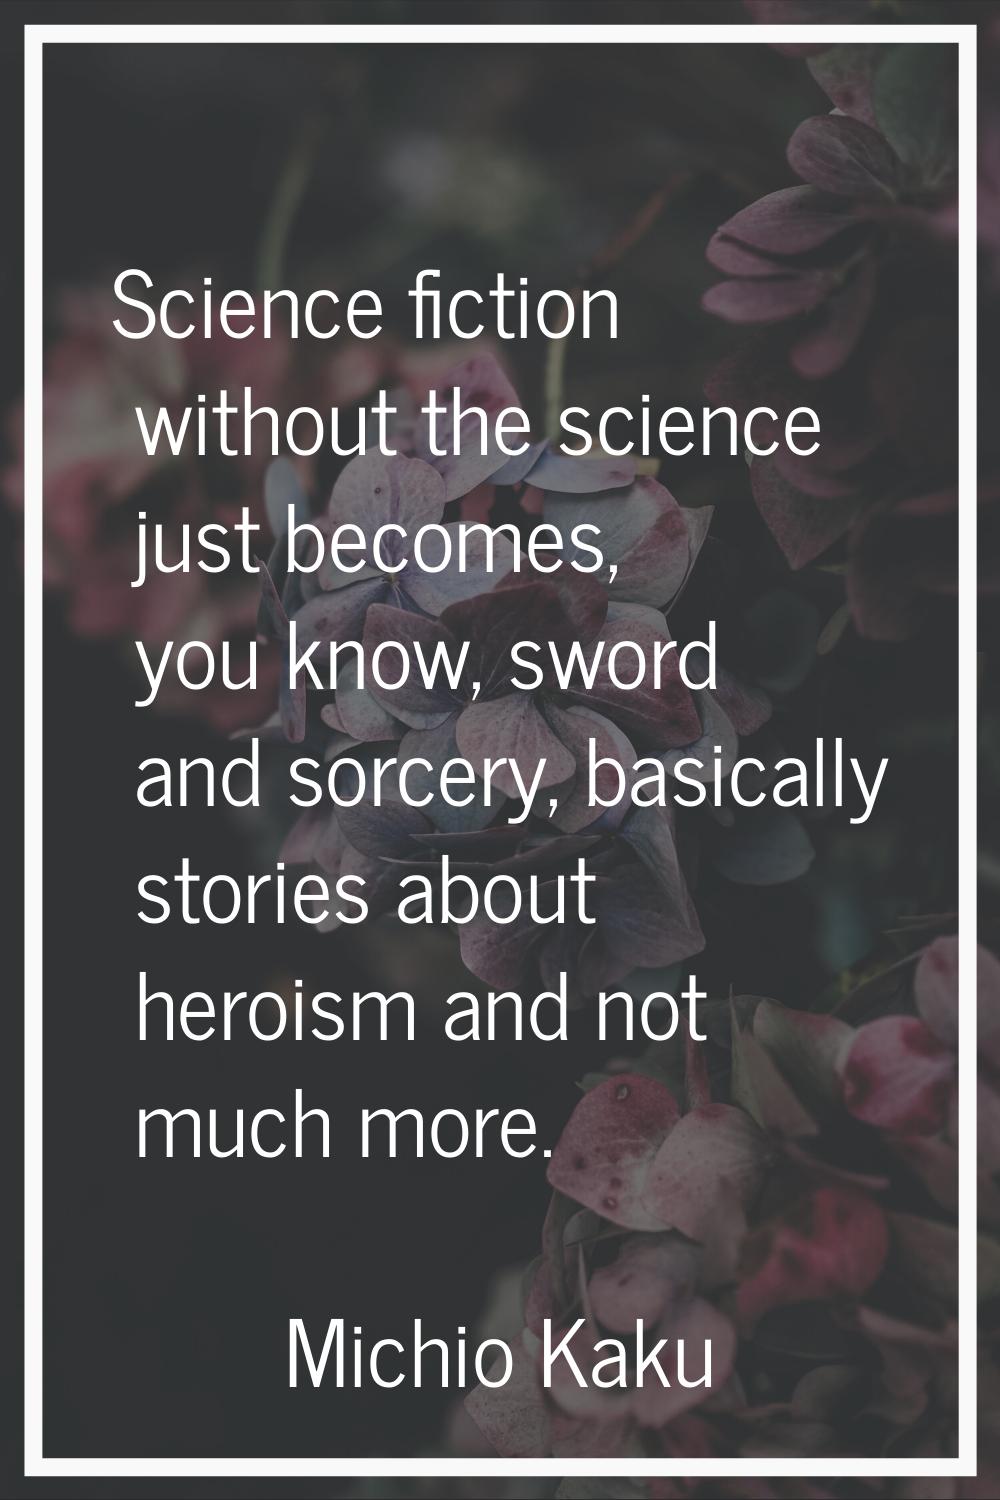 Science fiction without the science just becomes, you know, sword and sorcery, basically stories ab